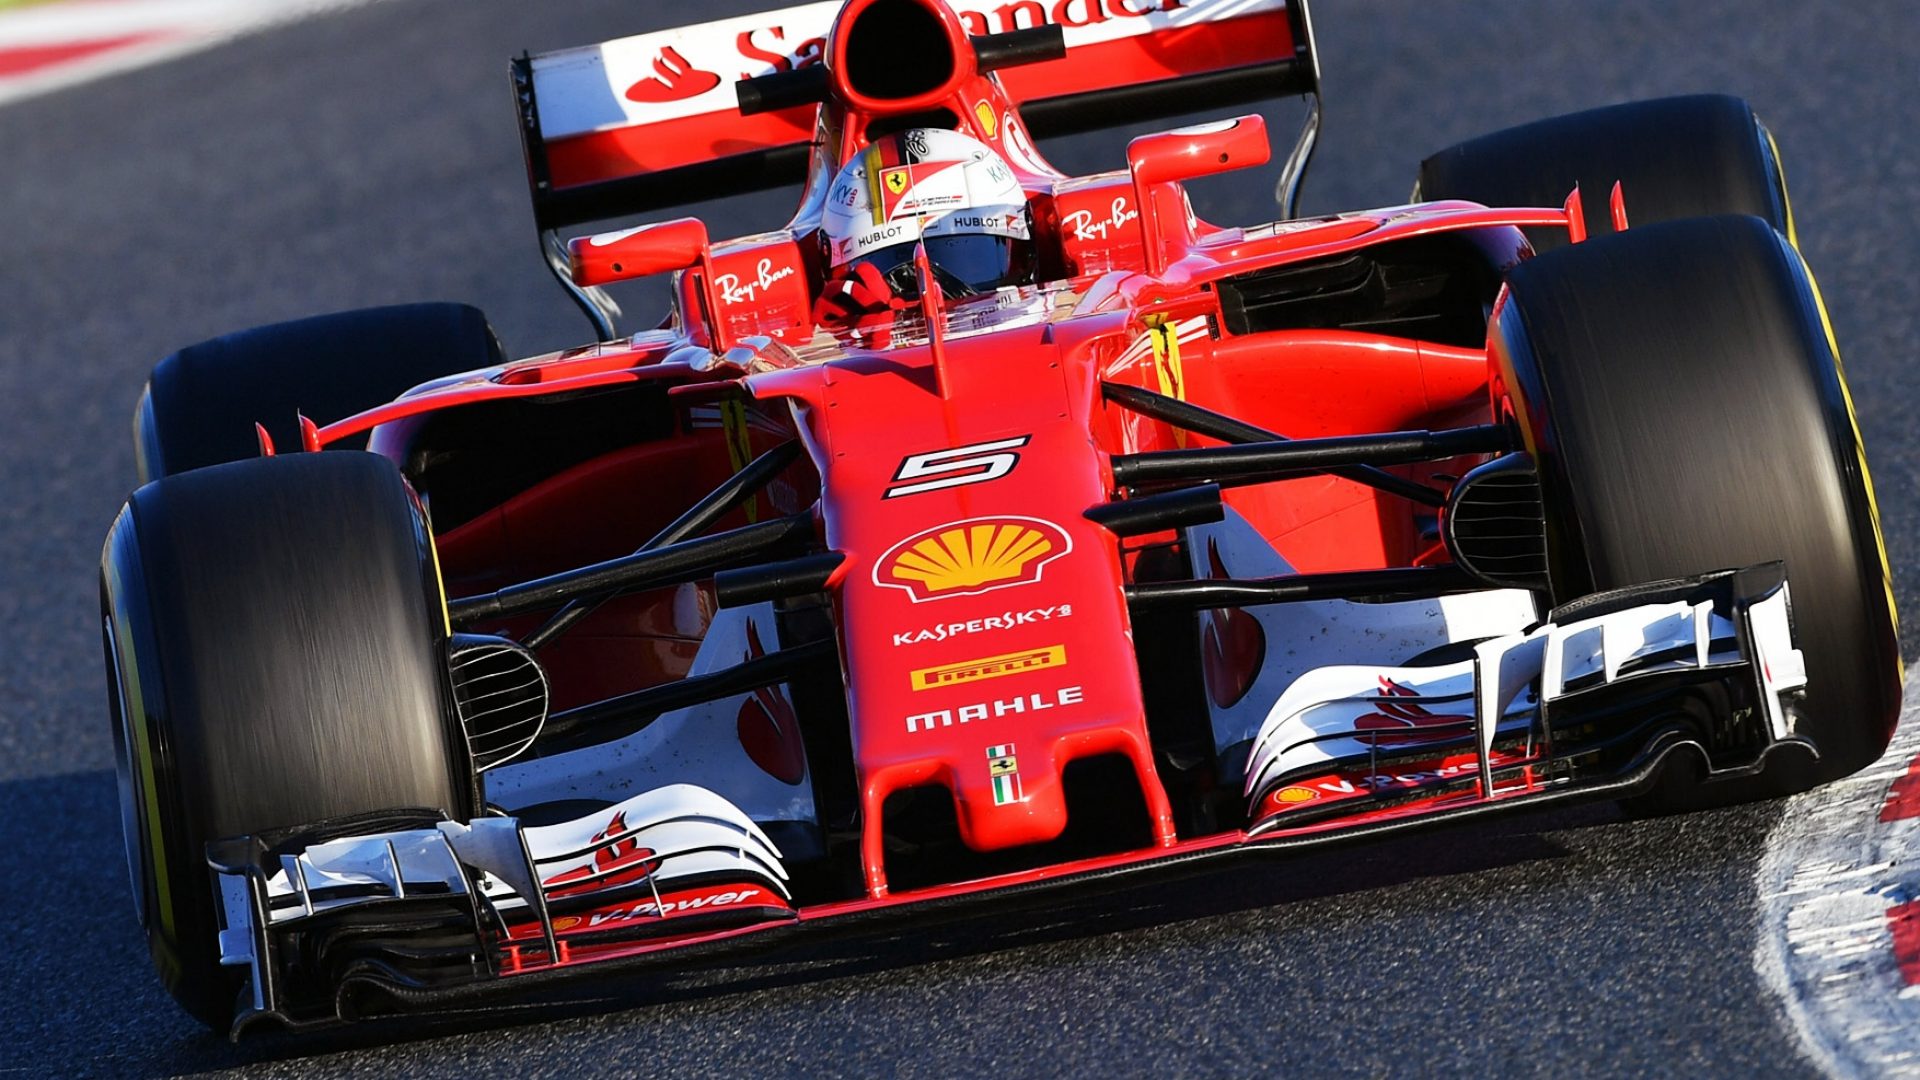 Scuderia Ferrari  is looking to rebound and rebuild their reputation in the 2017 season. The most prestigious name in Formula One, Ferrari has badly underperformed the past few seasons. If preseason testing is any indication, however, we may finally see the red stallion come back to life.